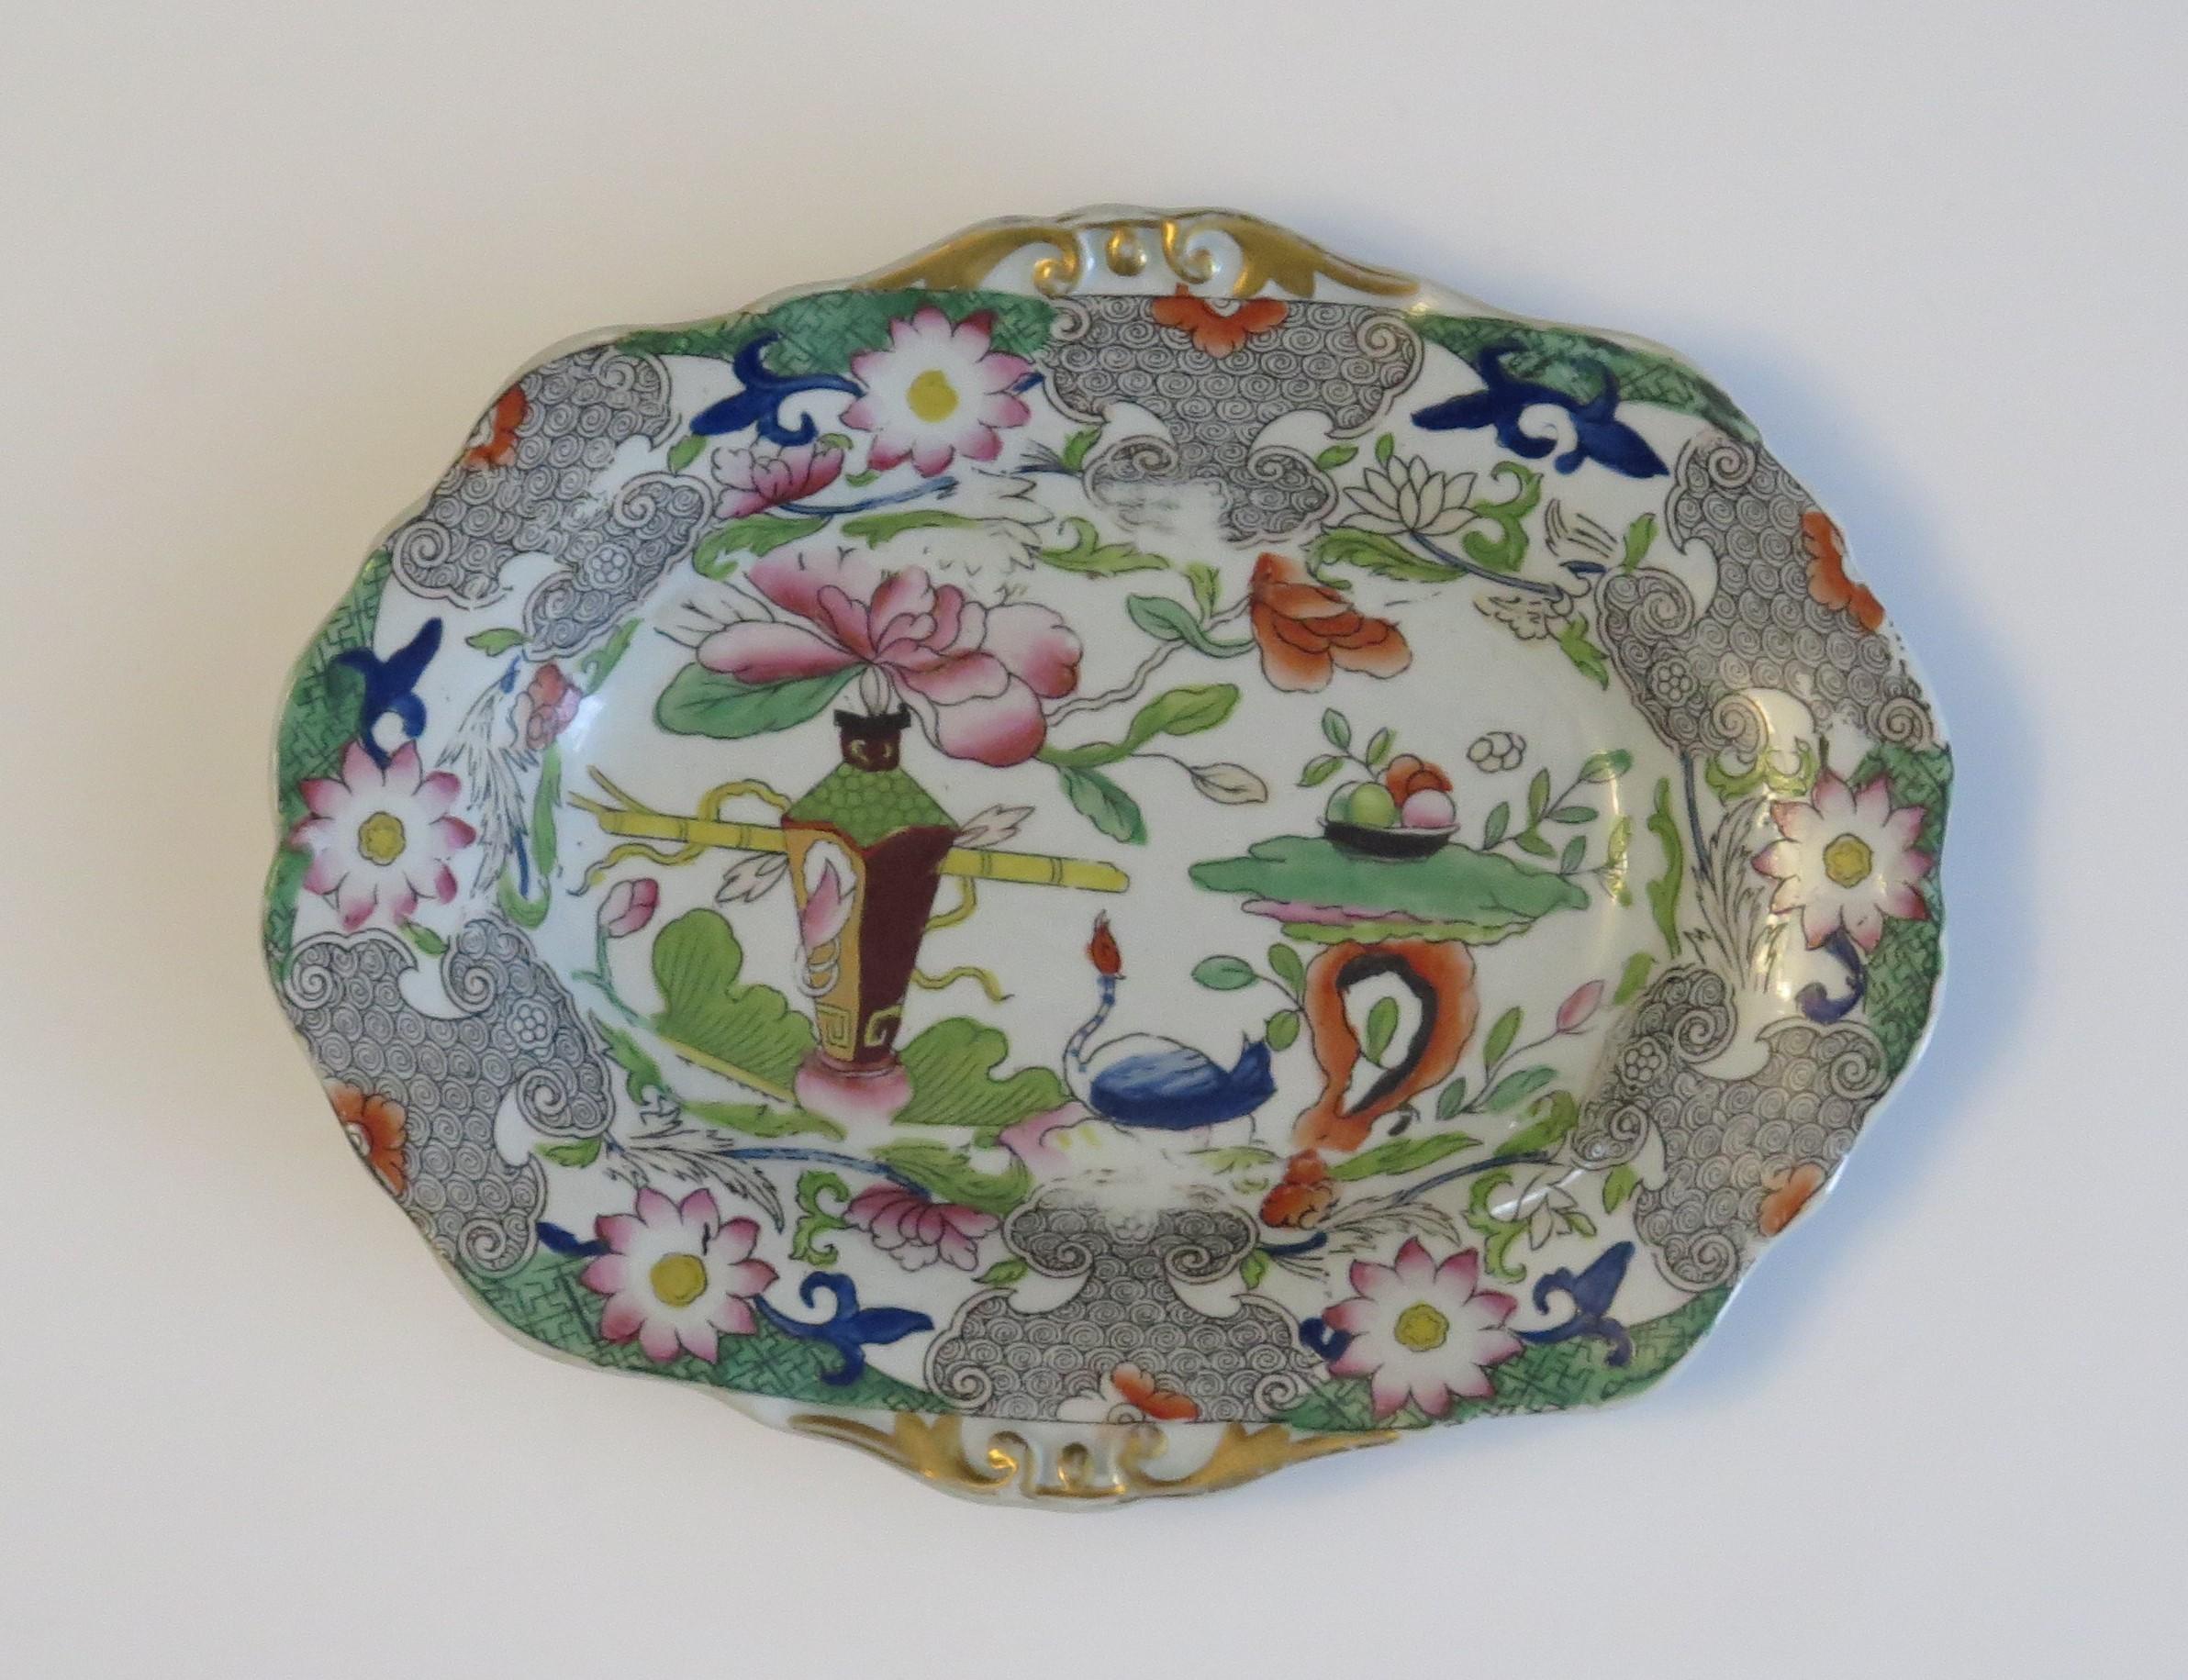 This is a good hand painted Mason's ironstone small oval dish, in the table and flowerpot gilded pattern, from their earliest George IIIrd period, circa 1818.

The piece is well potted with a small oval shape having moulded edges and standing on a